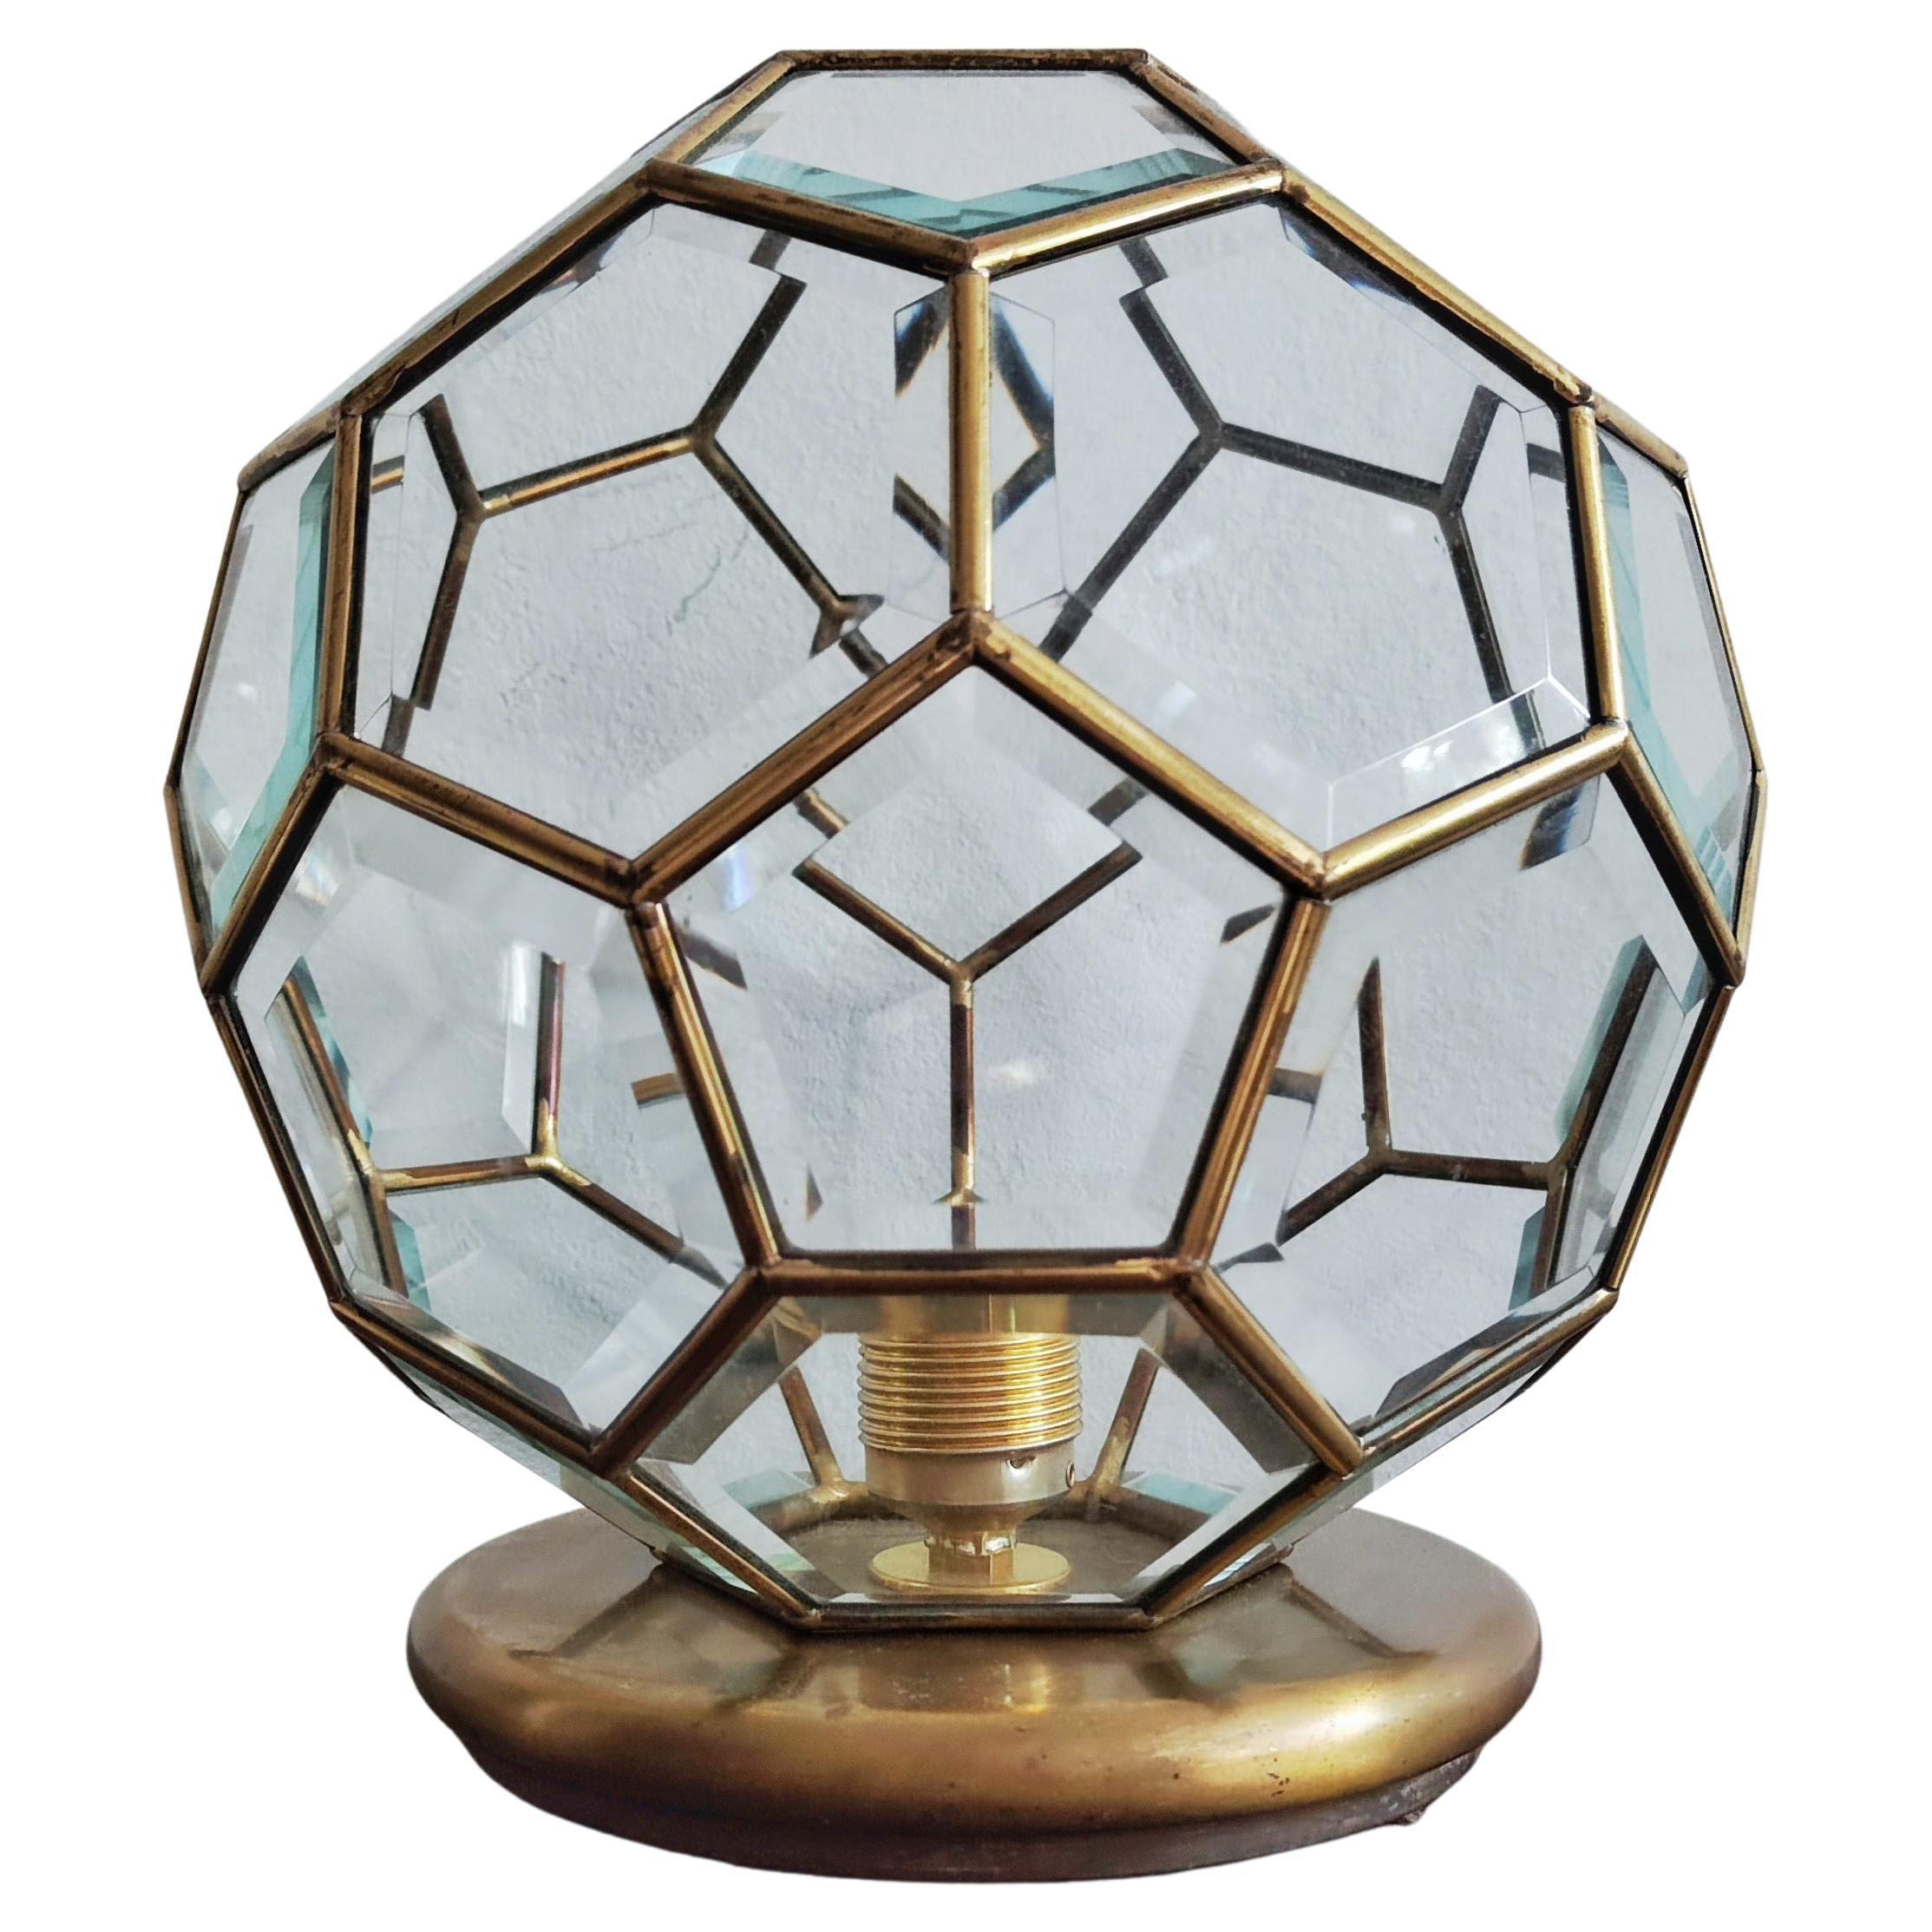 Adolf Loos Style  Lamp in Brass & Faceted Glass, Austria 1950s